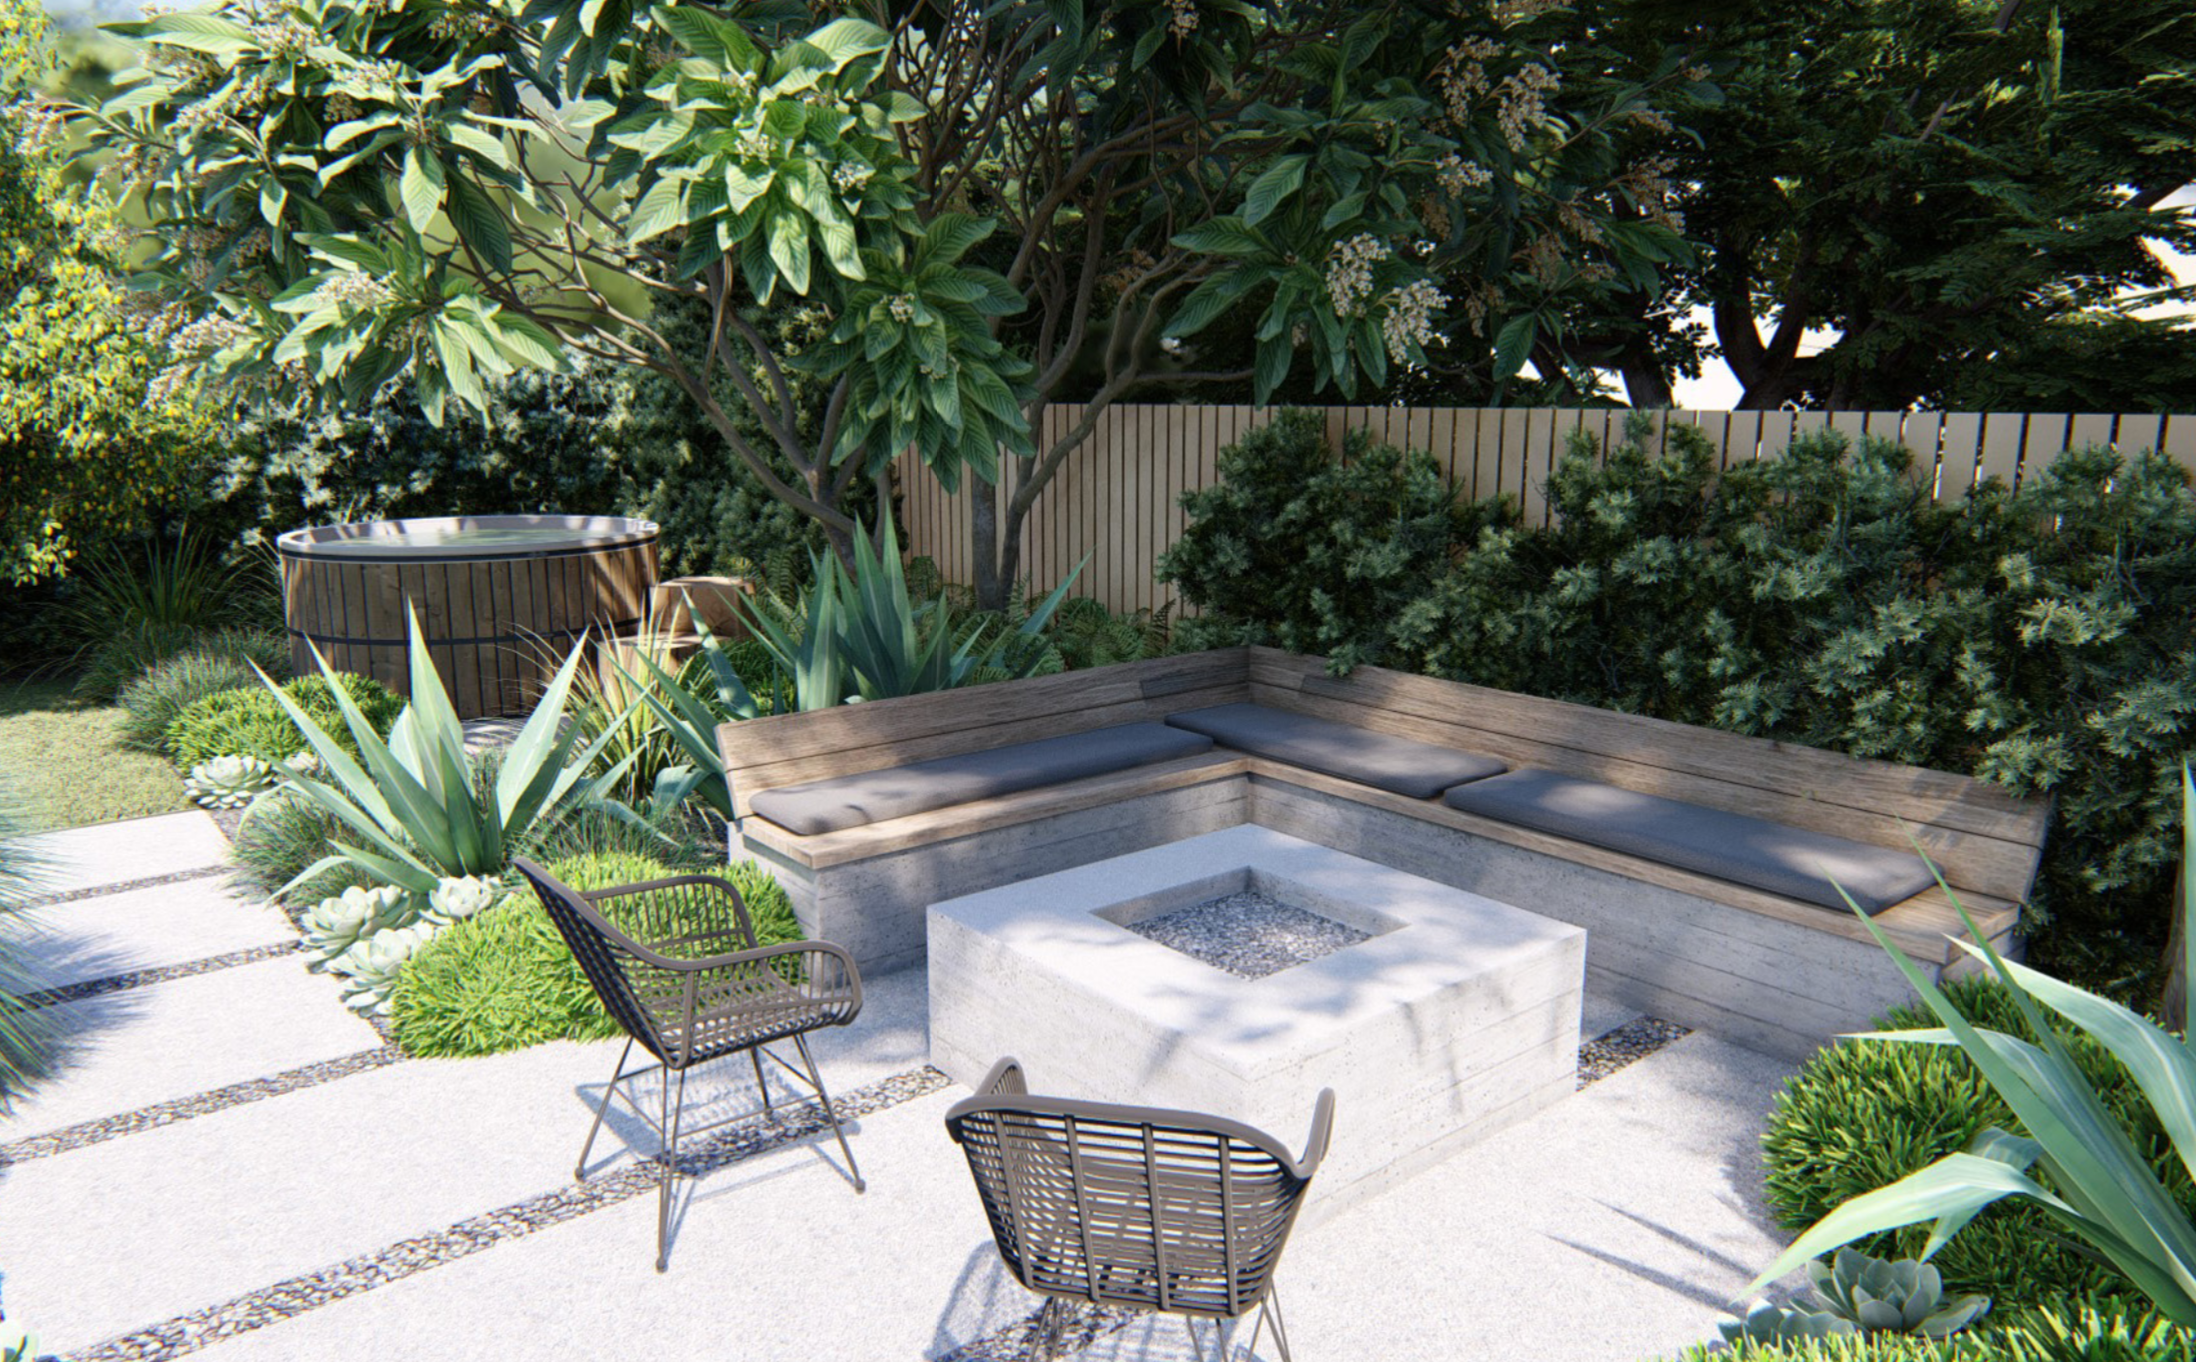 This backyard seating area and fire pit constructed using board-formed concrete and wood is the perfect space for entertaining friends or having a glass of wine in the evening.